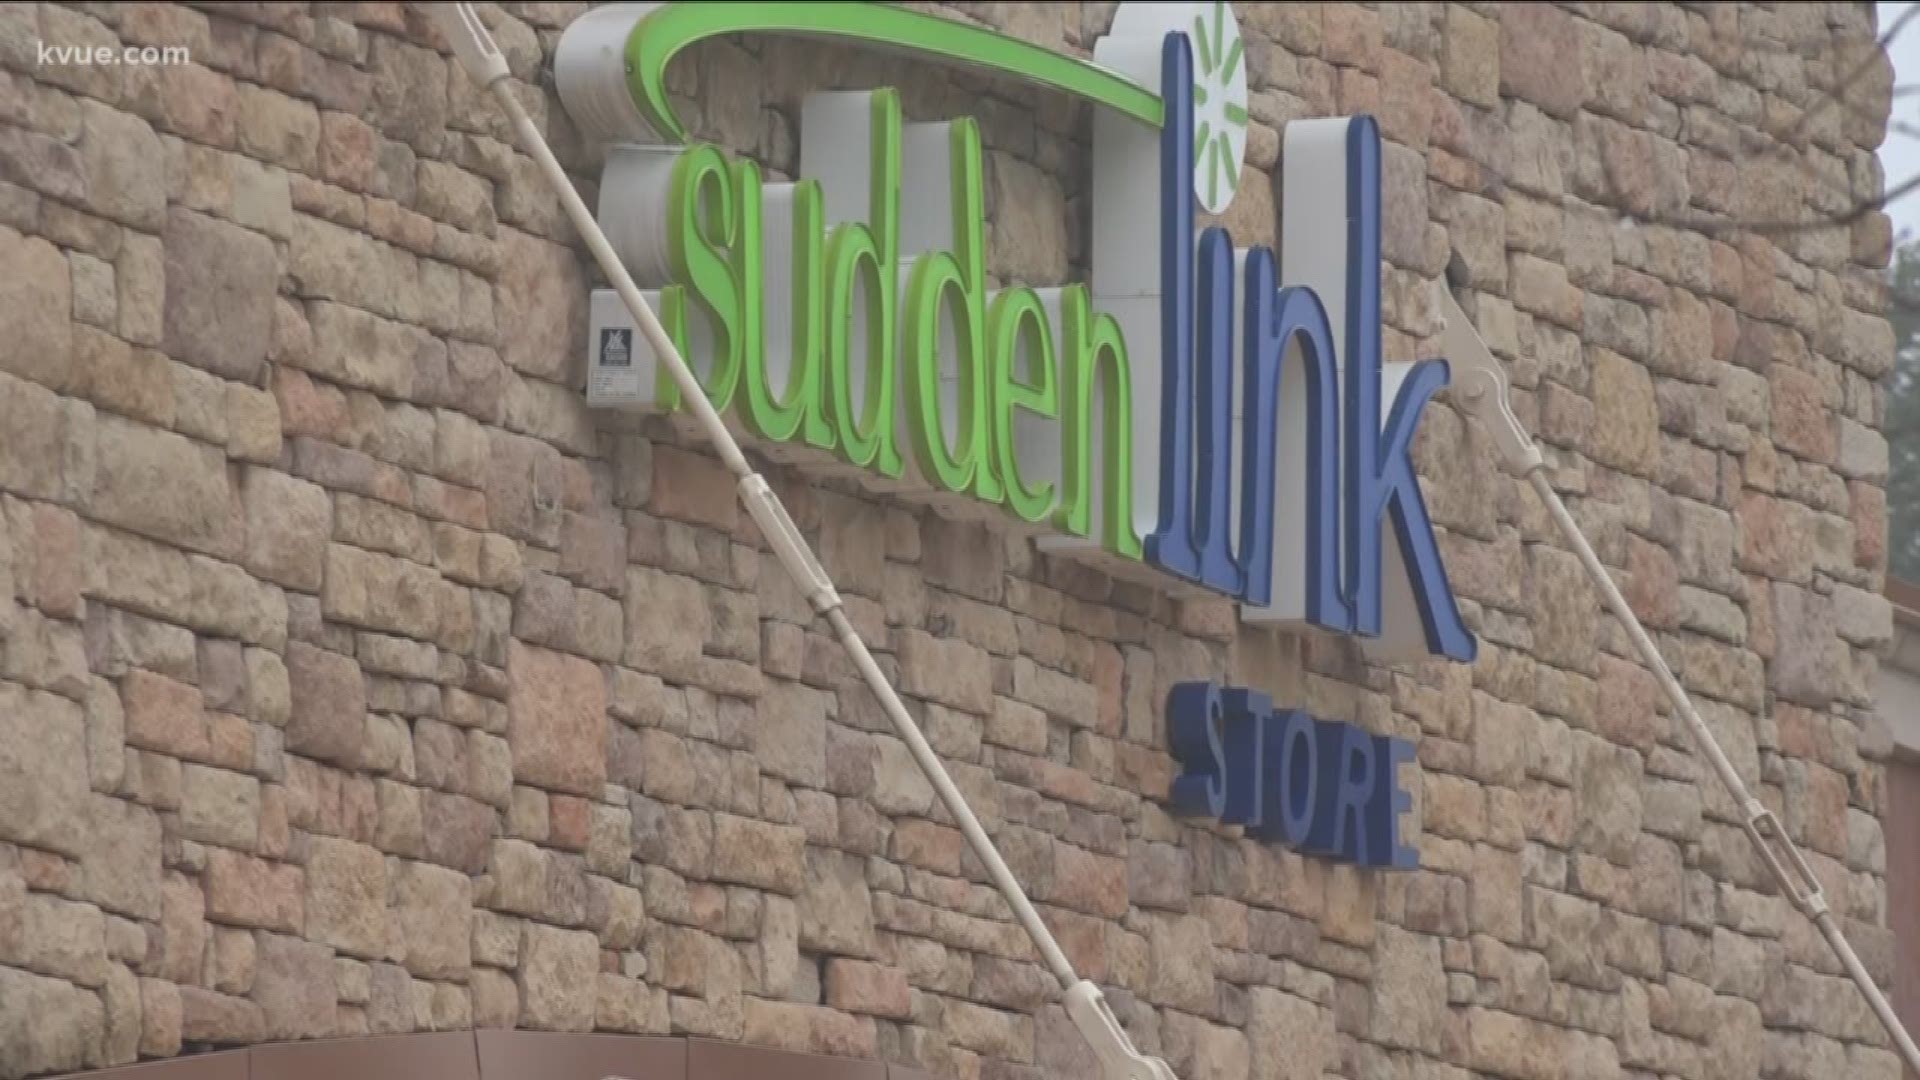 On Tuesday, the Georgetown City Council will approve a resolution calling out Suddenlink Communications.